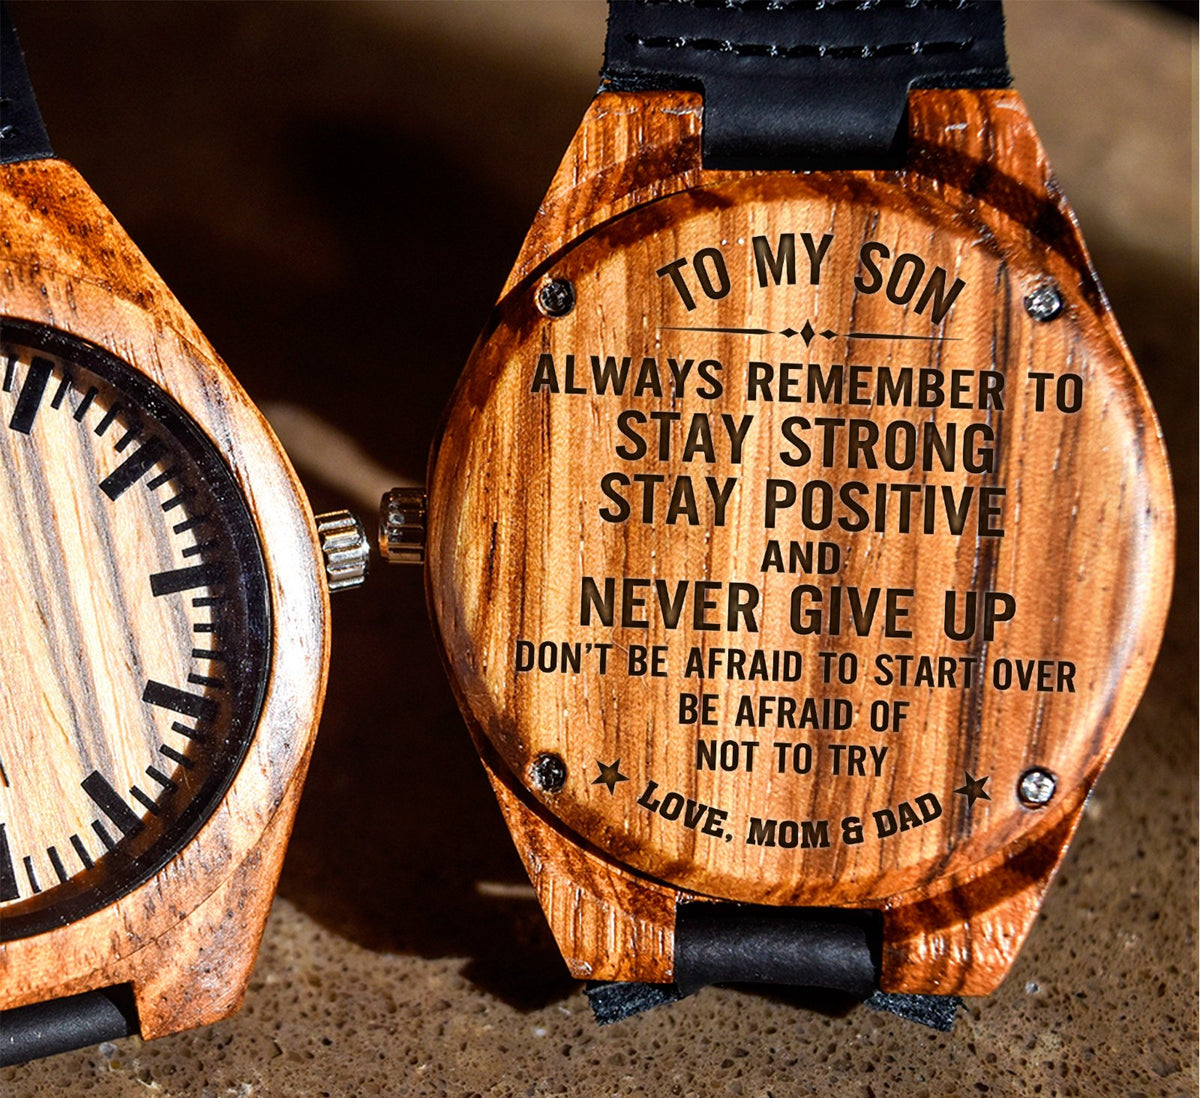 To My Son - Always Remember to Stay Strong Stay Positive and Never Give Up - Wooden Watch